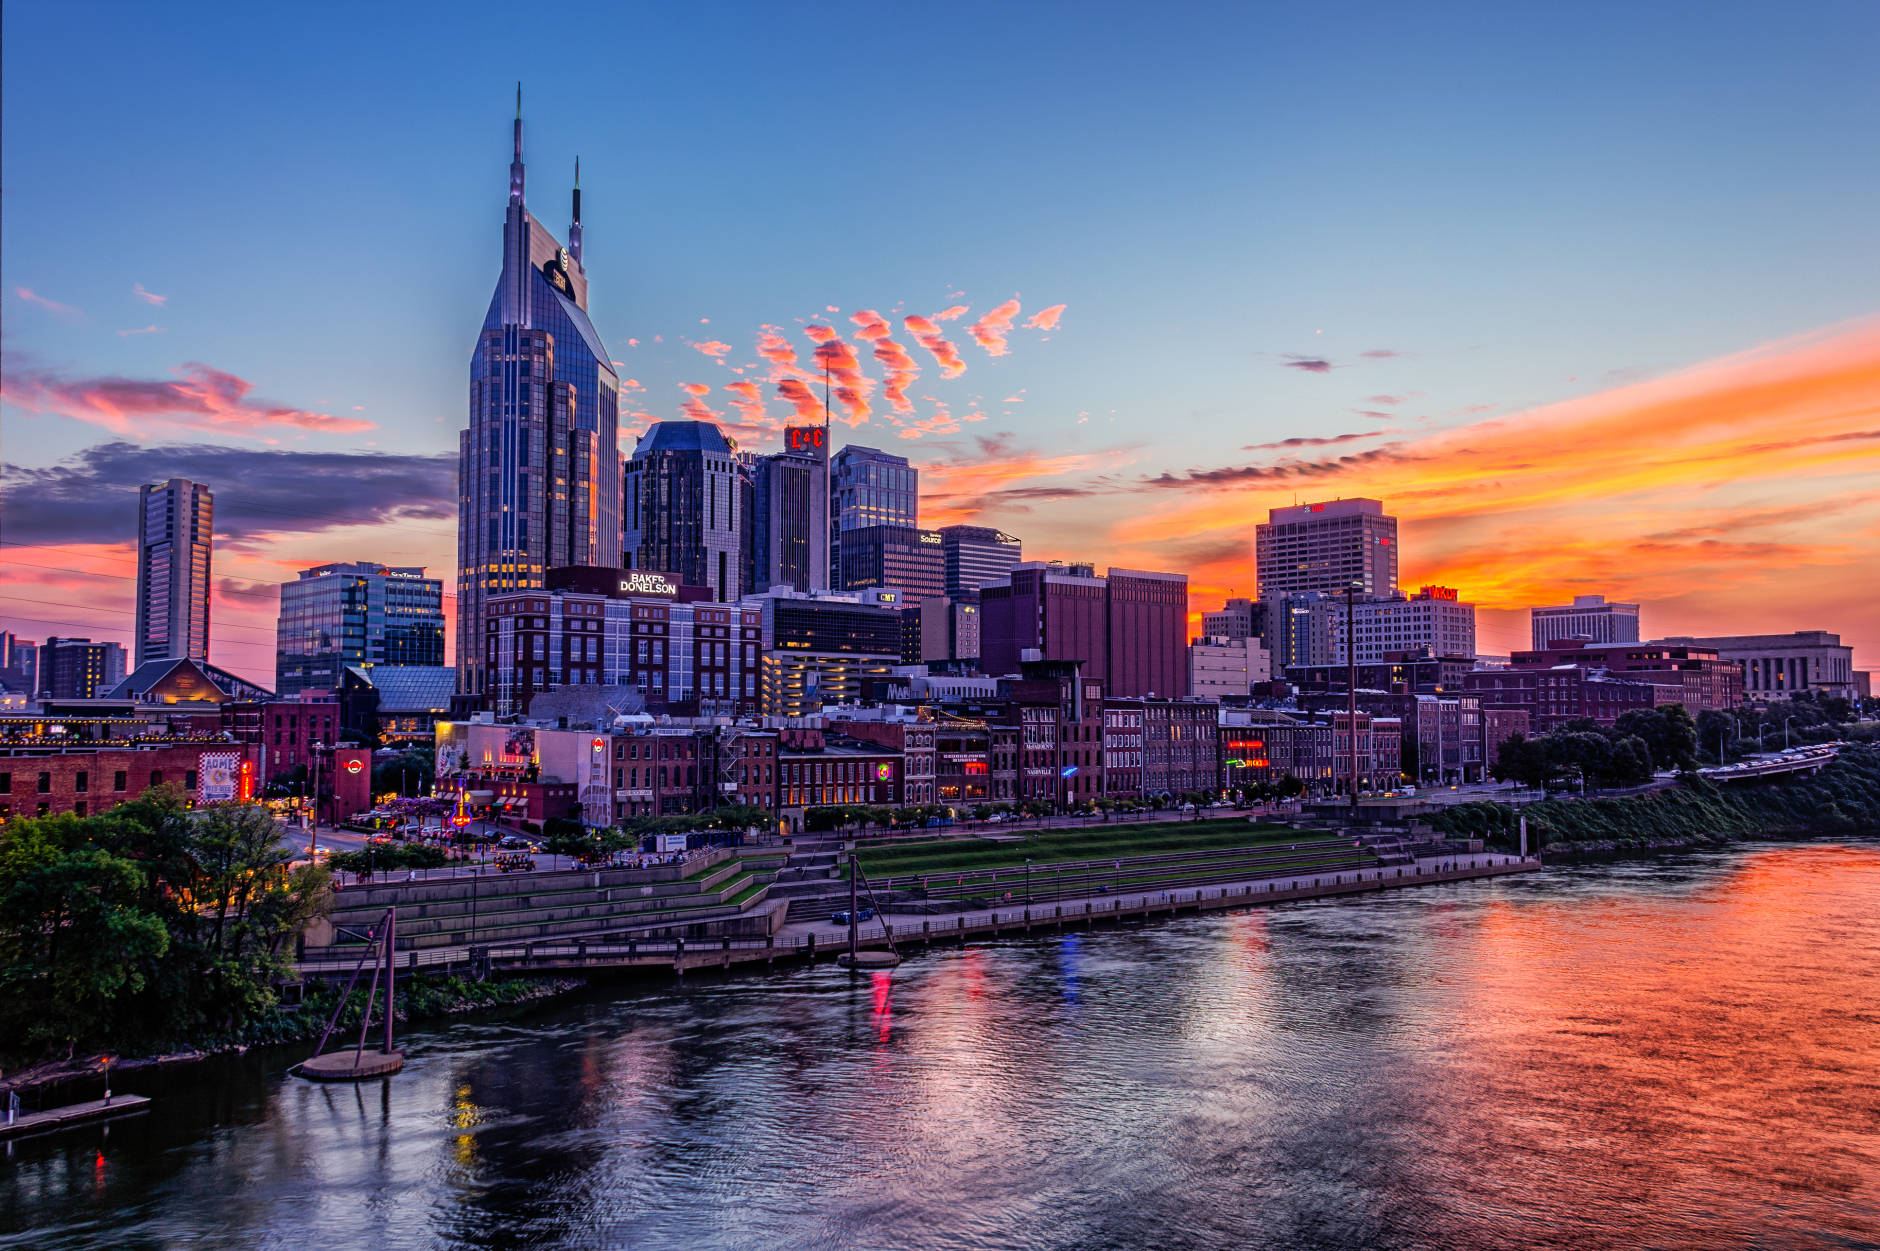 13. Nashville, Tennessee

Honky-tonk, country music and more await you in Nashville, No. 13 in Condé Nast Traveler's "The Best Big Cities in the U.S." (Getty Images/iStockphoto/Sean Pavone)